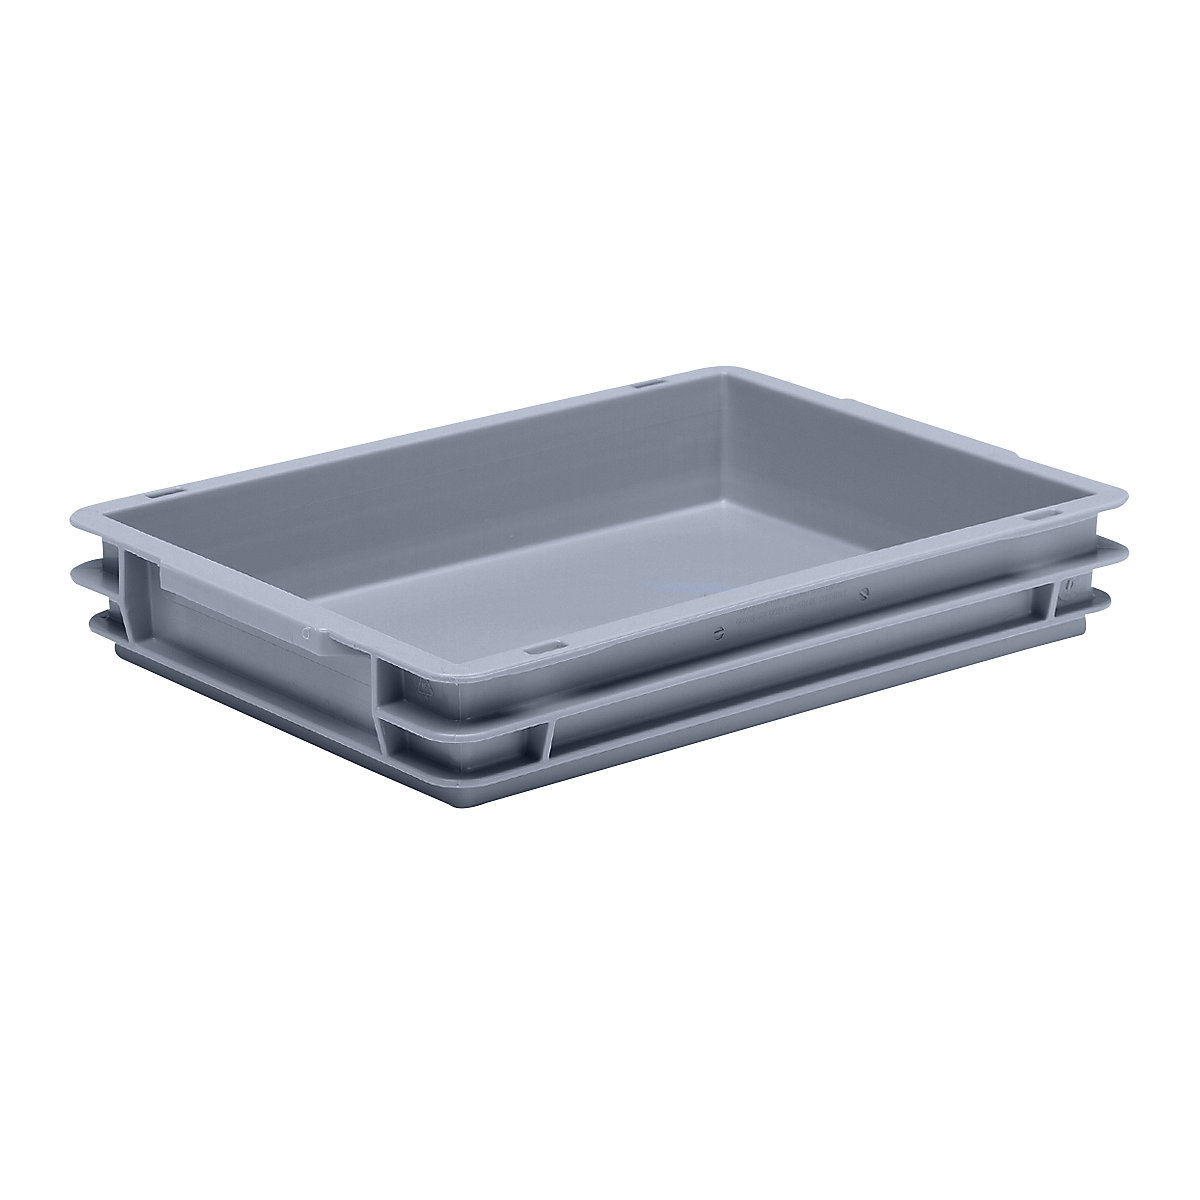 Euro stacking container made of polypropylene (PP), max. load 20 kg, silver grey, capacity 6 l, external height 65 mm, pack of 10